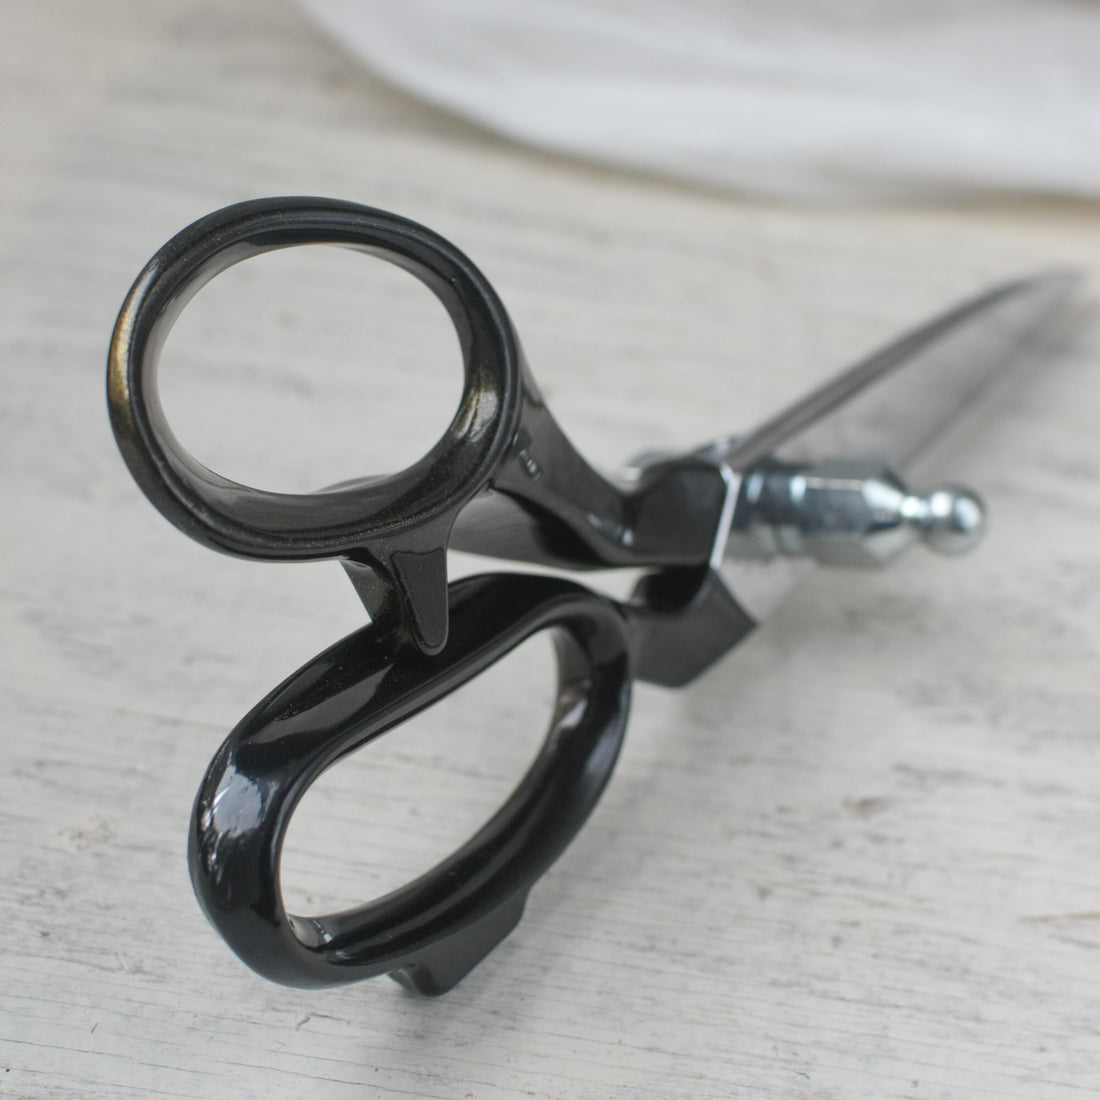 12 Tailor Sewing Shears Scissors Professional BRAND NEW